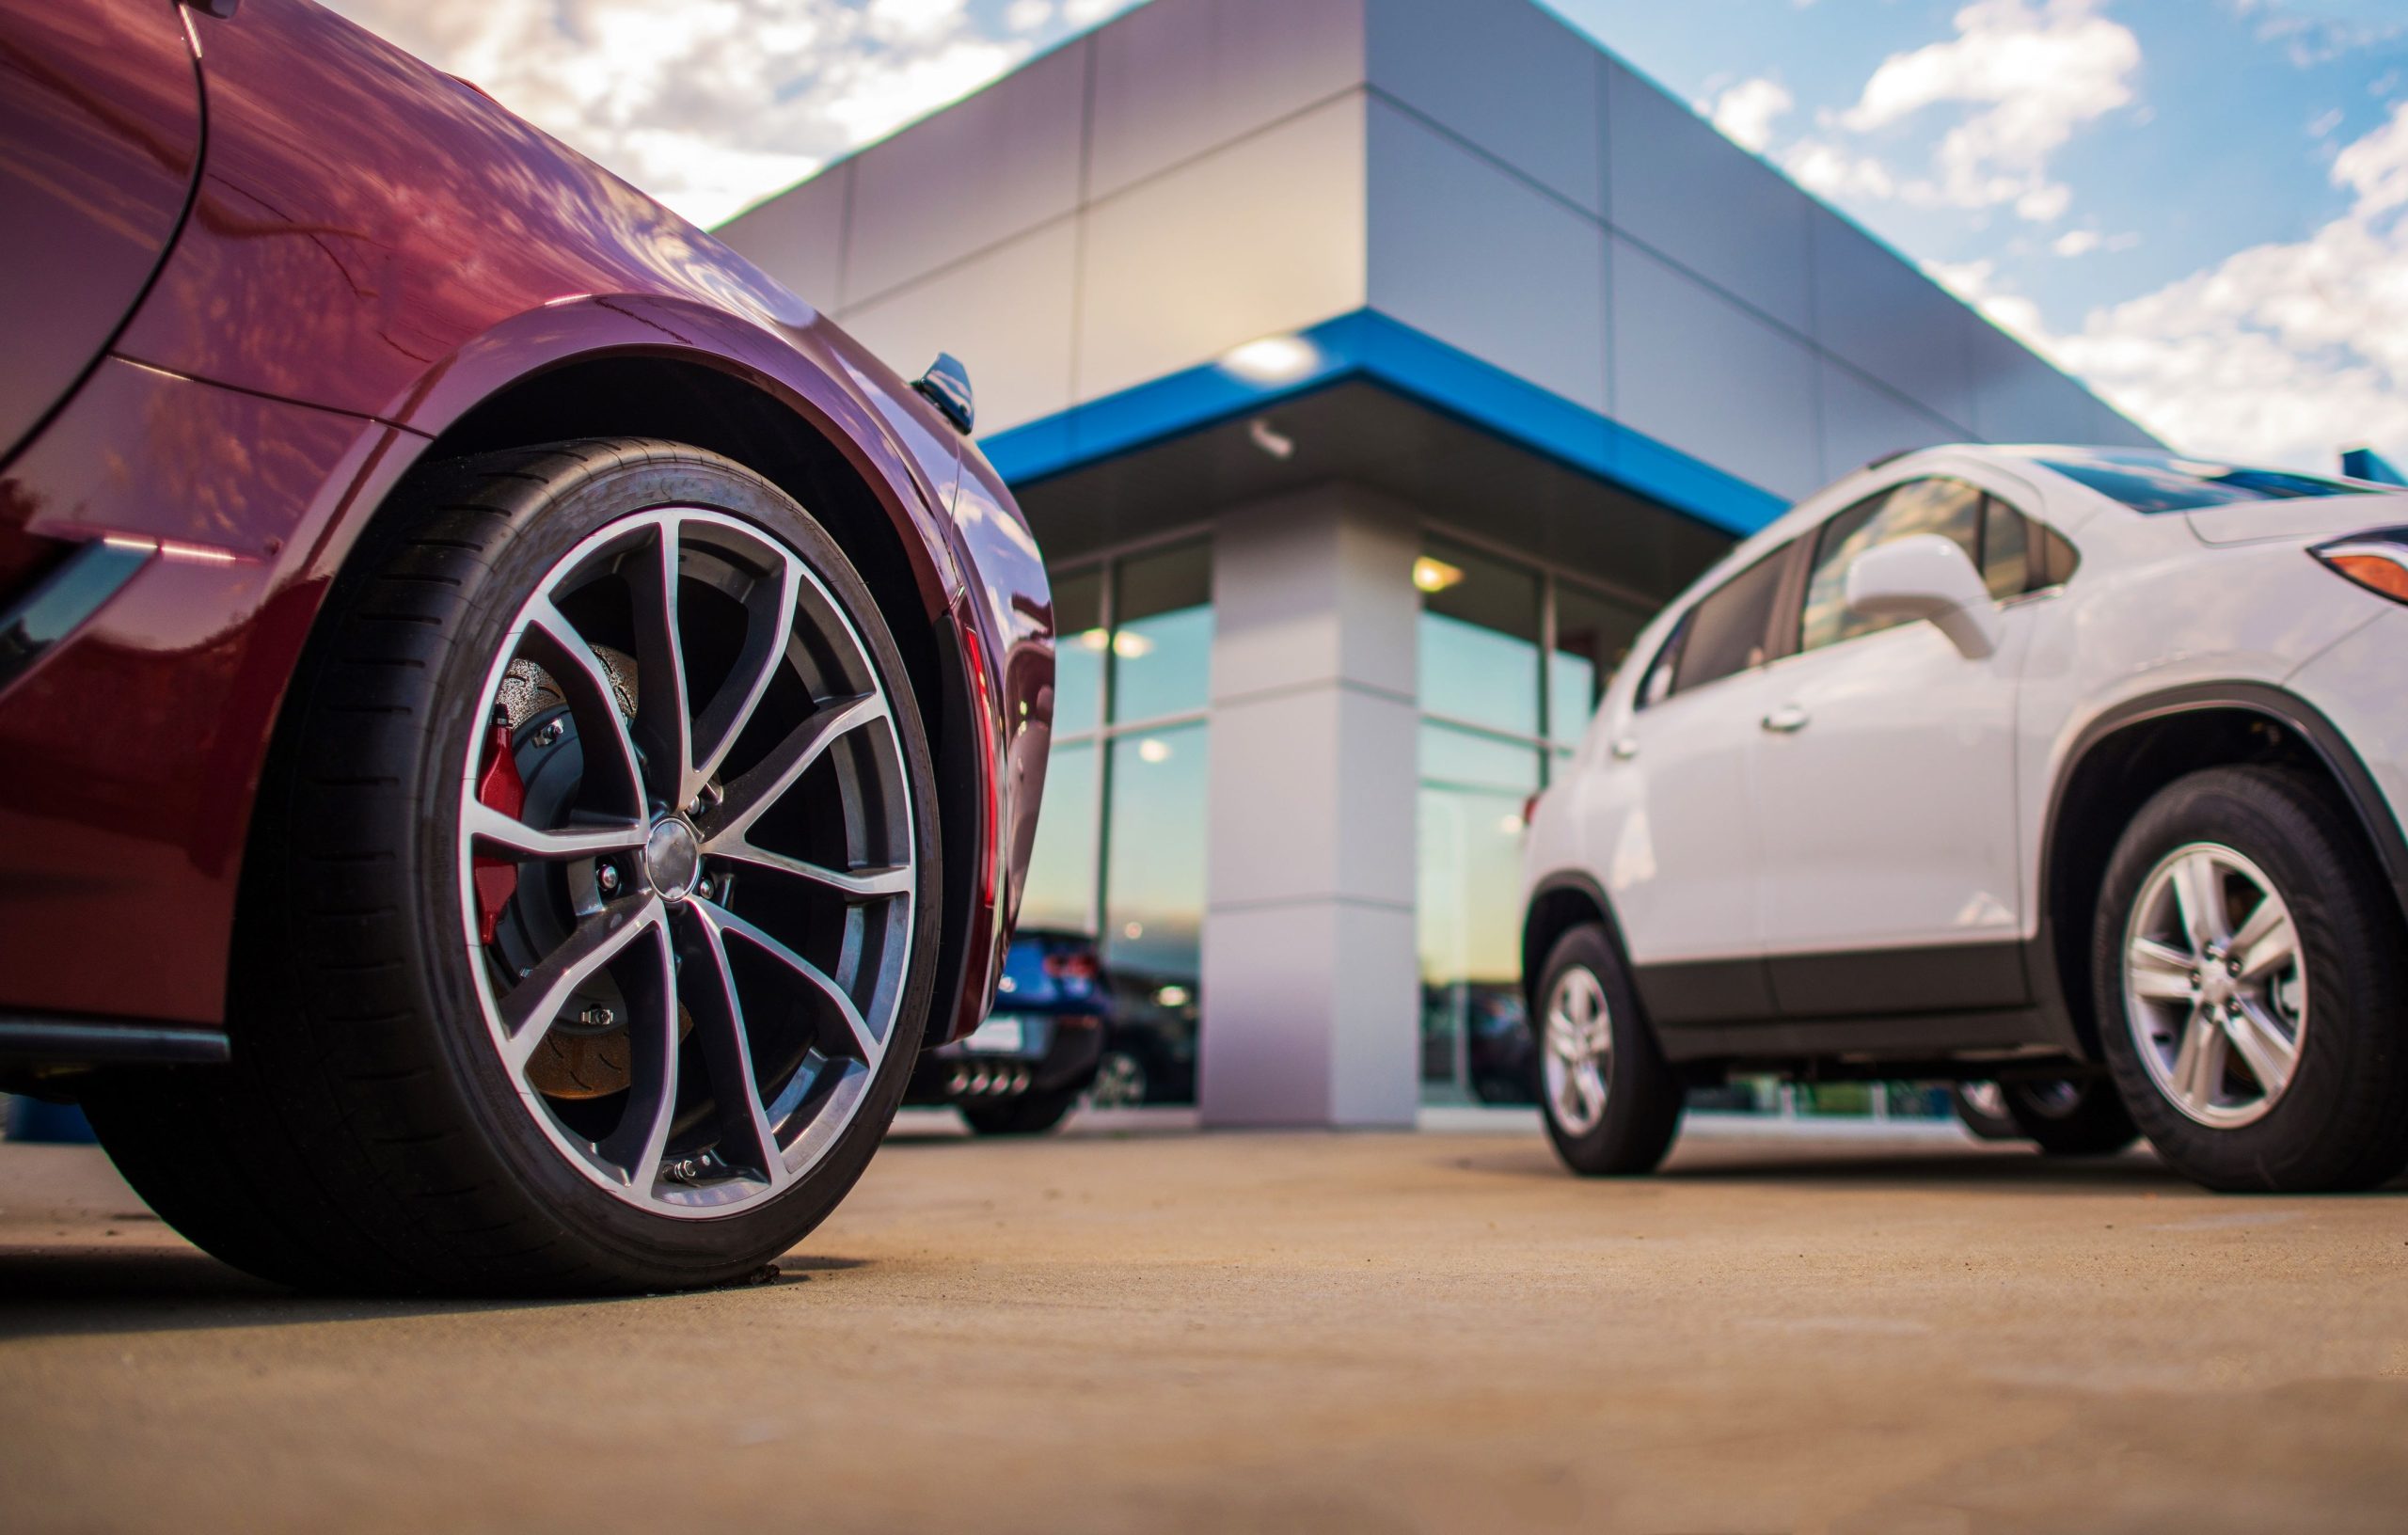 Should You Buy or Lease Your Next Car?